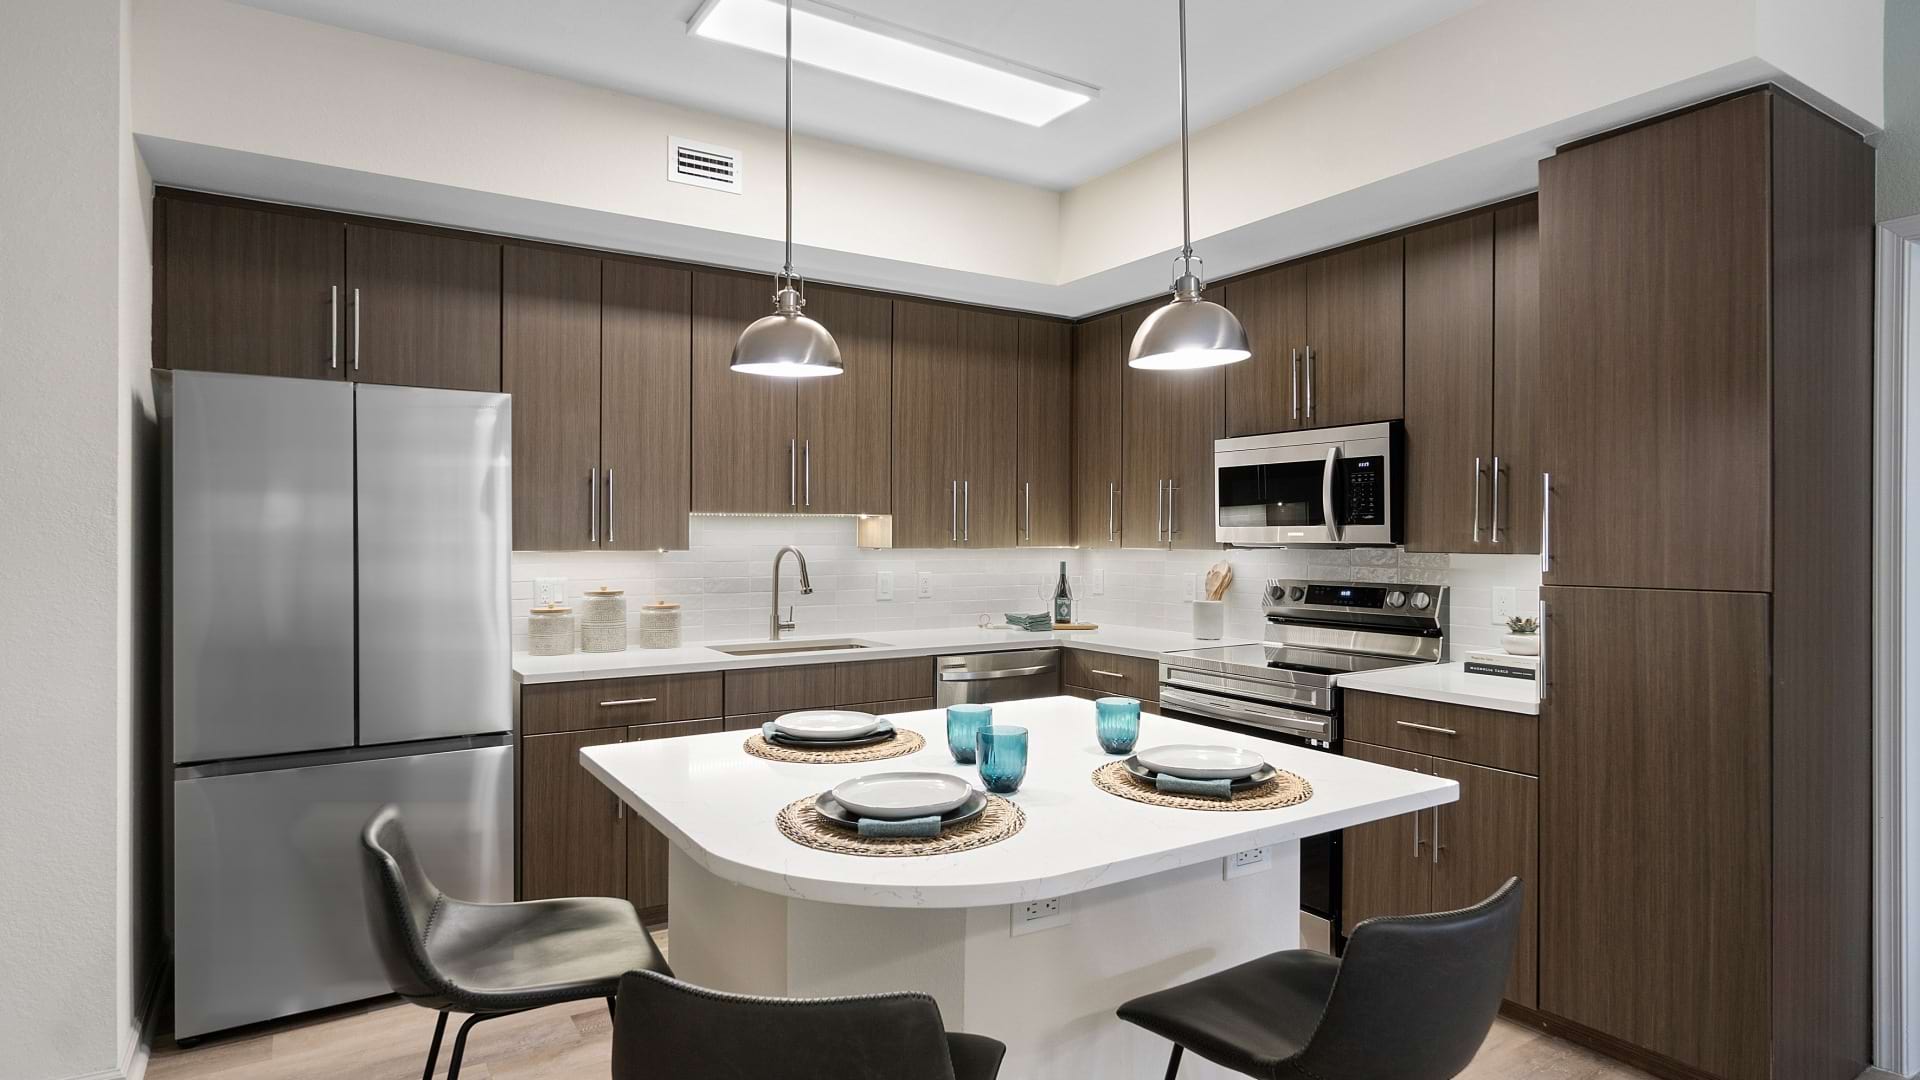 Energy-Efficient, Stainless Steel Appliances at Our West Palm Apartments